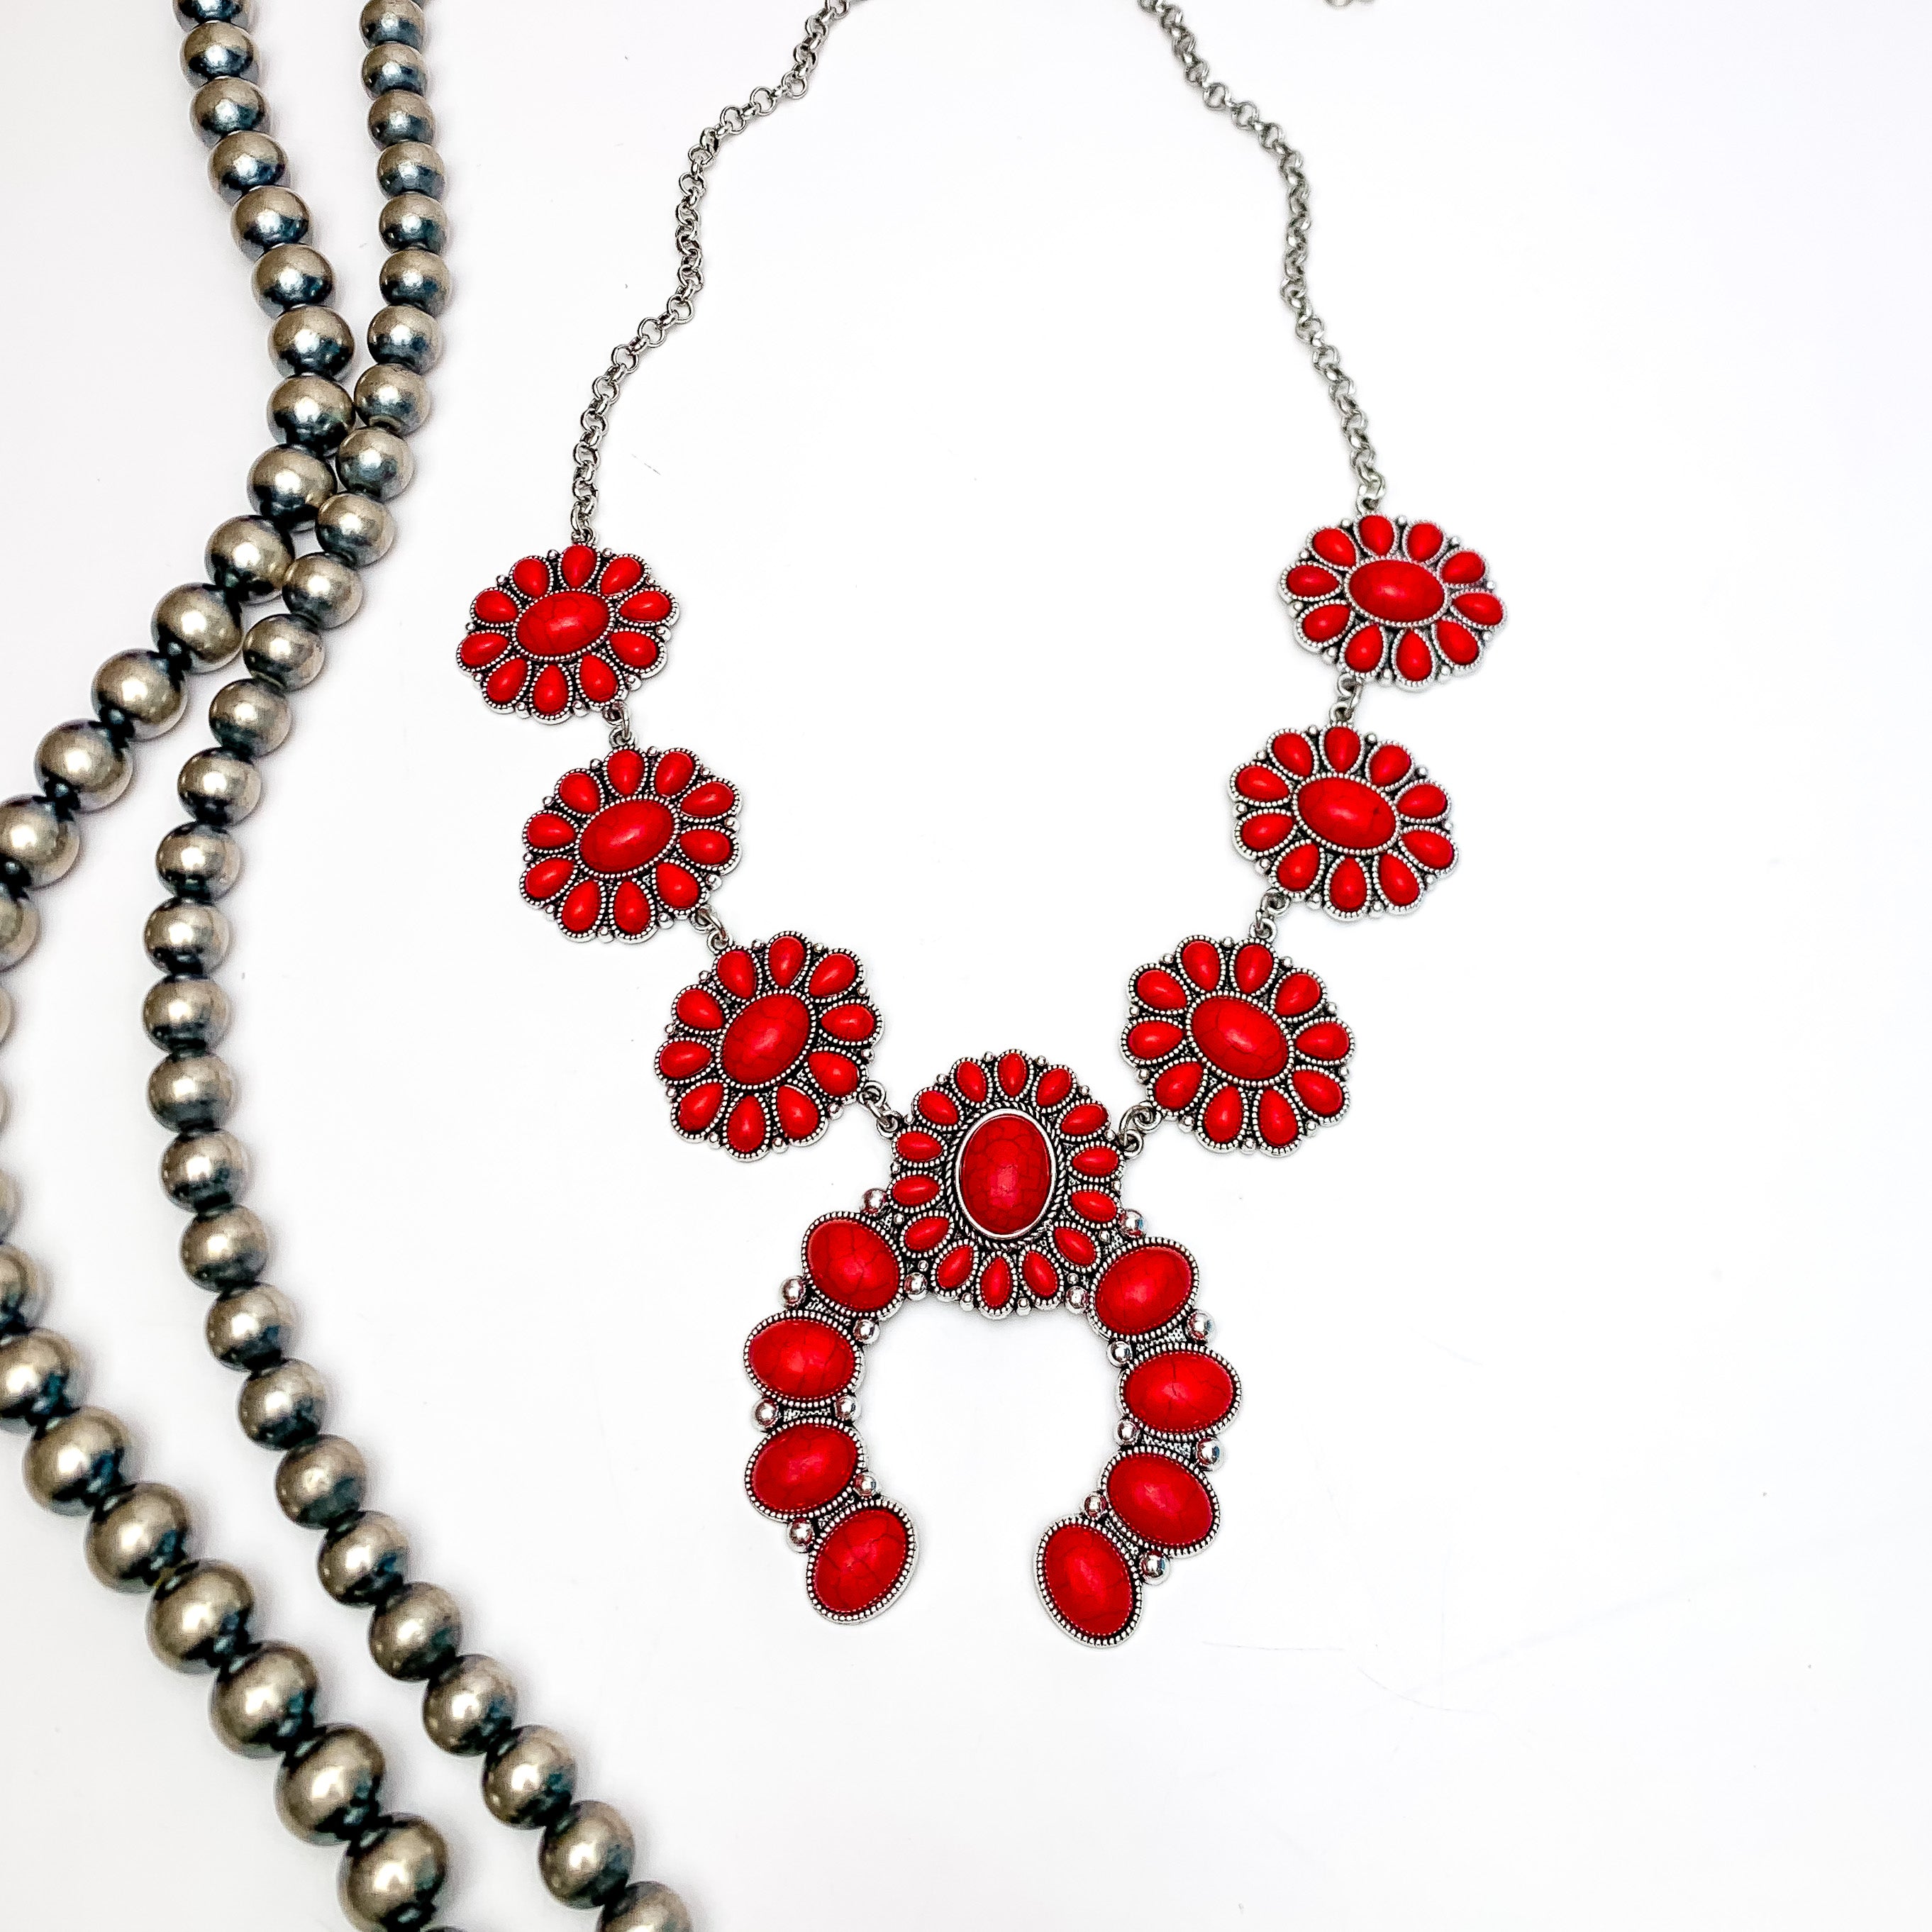 Amazon.com: Small Red Coral Squash Blossom Necklace Set, Navajo Native  American Handmade, 925 Sterling Silver, Artisan Signed, Shadowbox Style :  Handmade Products